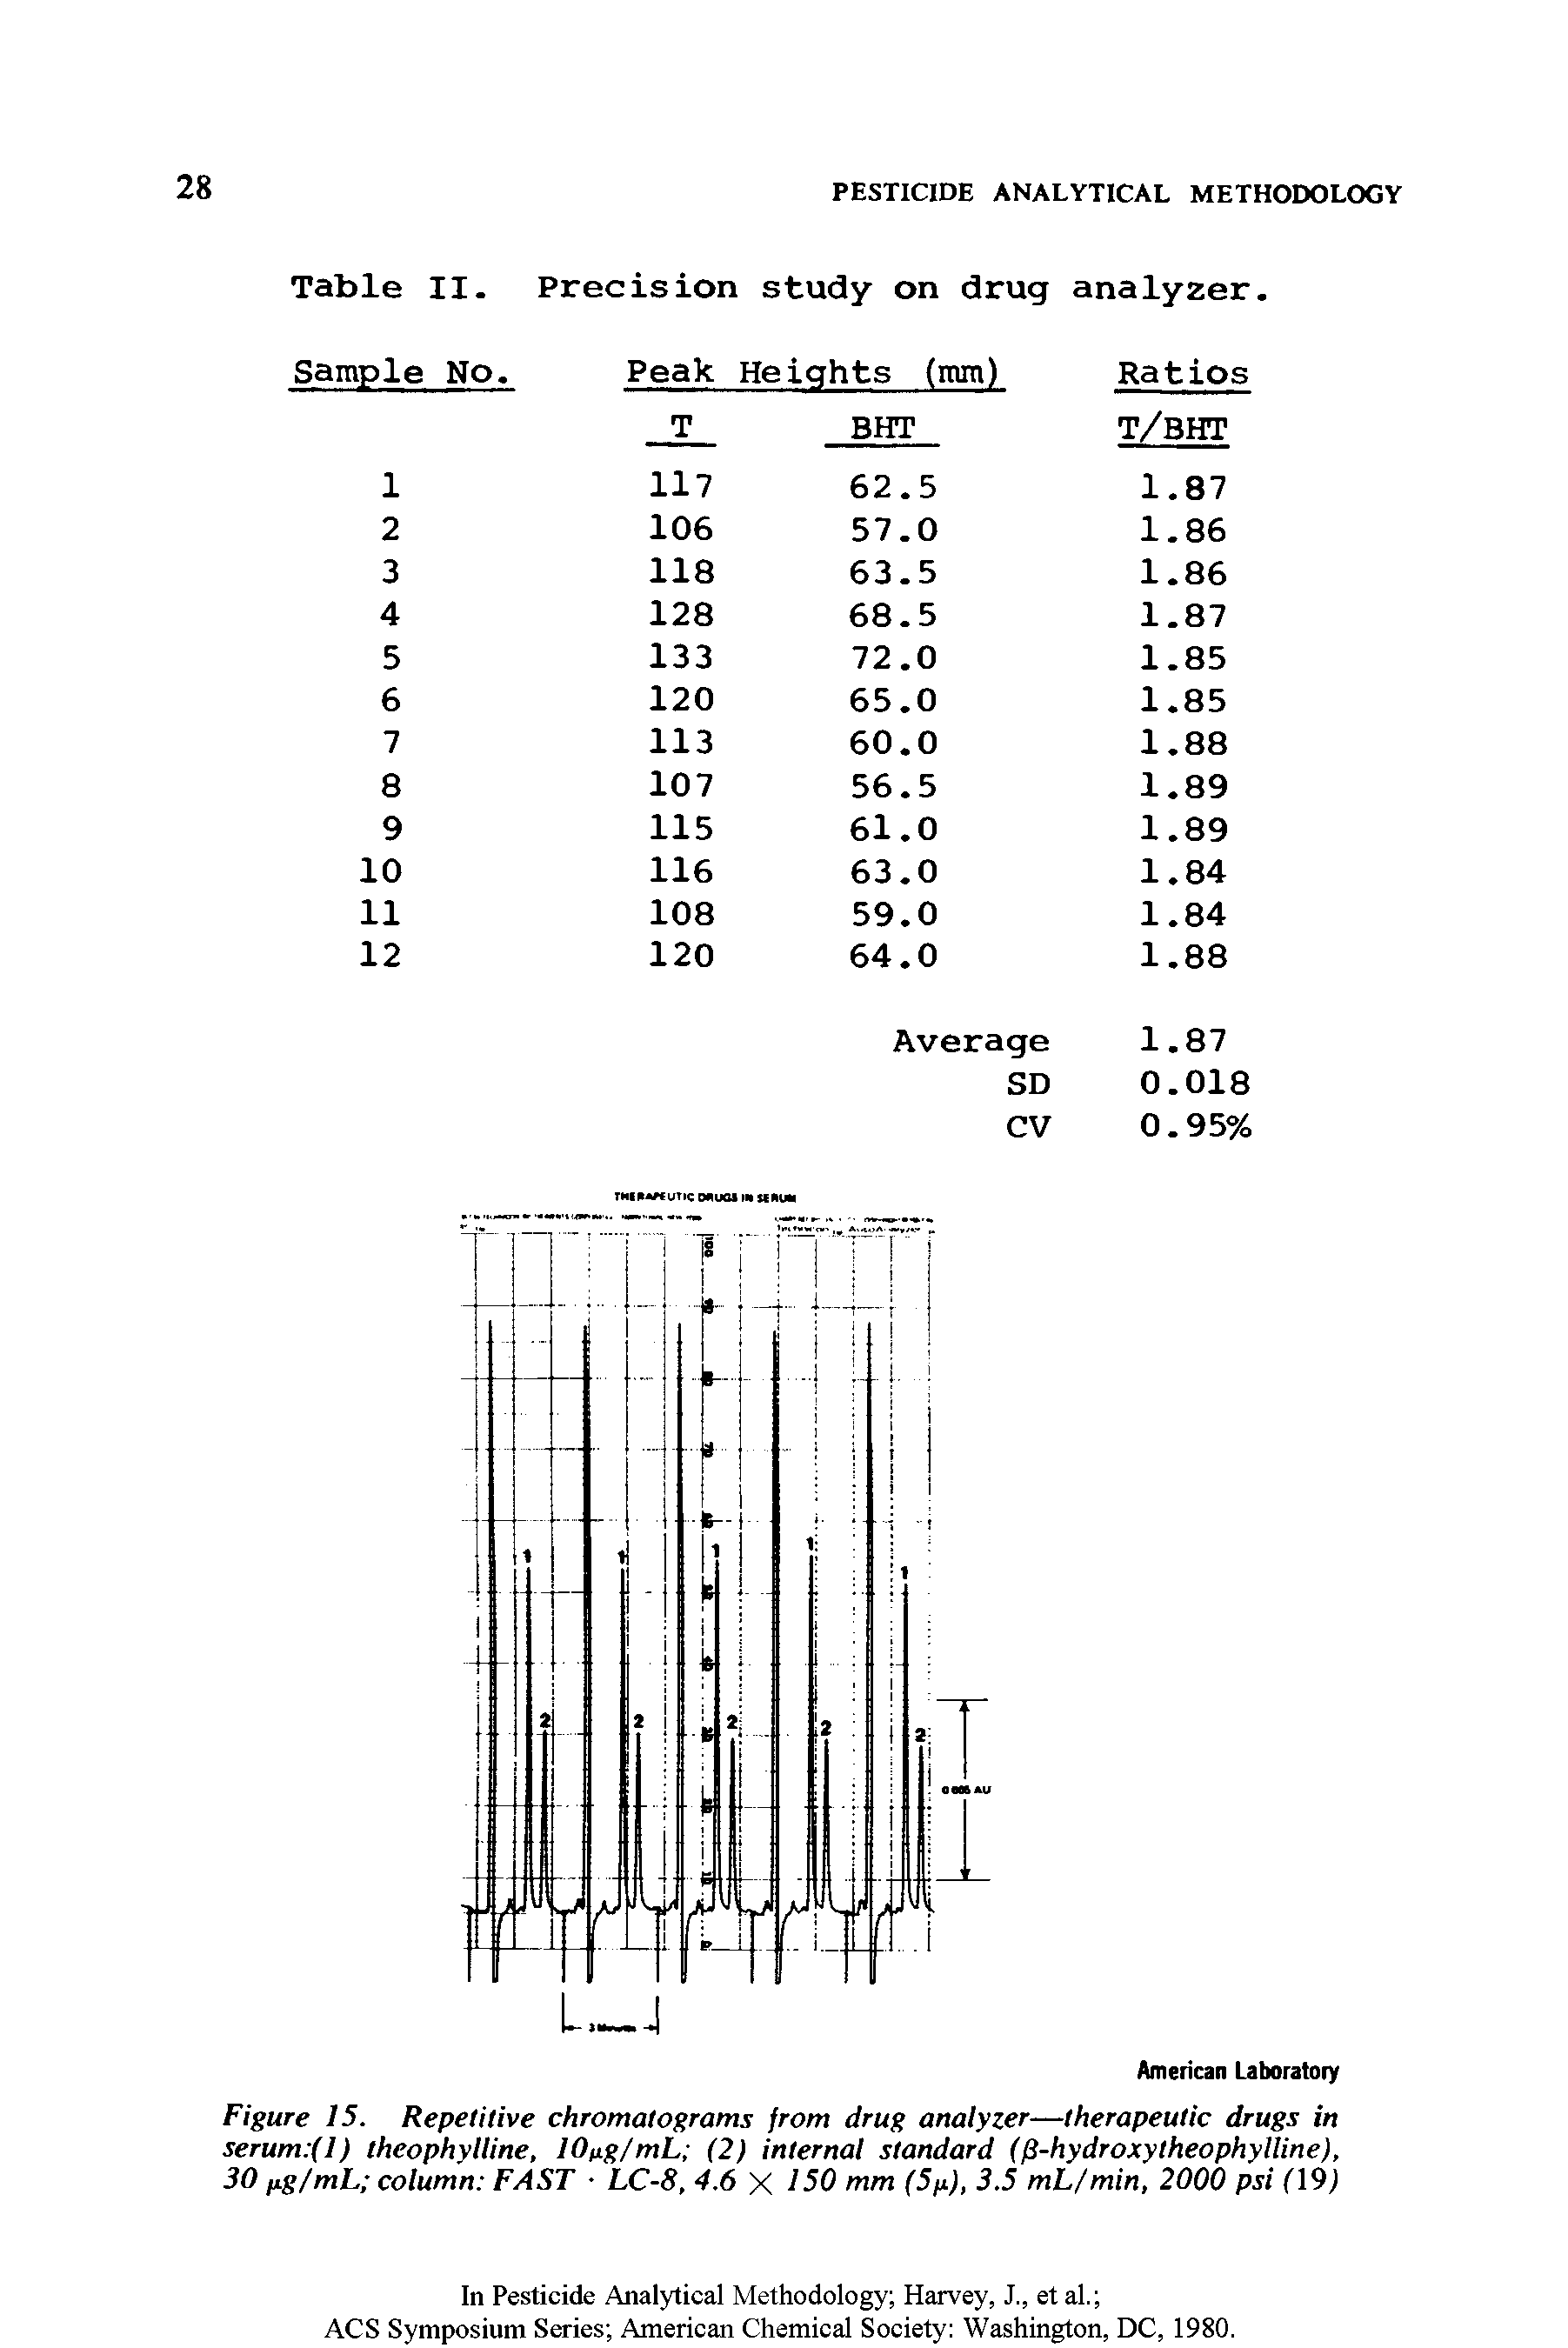 Figure 15. Repetitive chromatograms from drug analyzer—therapeutic drugs in serum (l) theophylline, 10v.g/mL (2) internal standard ((2-hydroxytheophylline), 30 fug/mL column FAST LC-8, 4.6 X 150 mm (5p), 3.5 mL/min, 2000 psi (19)...